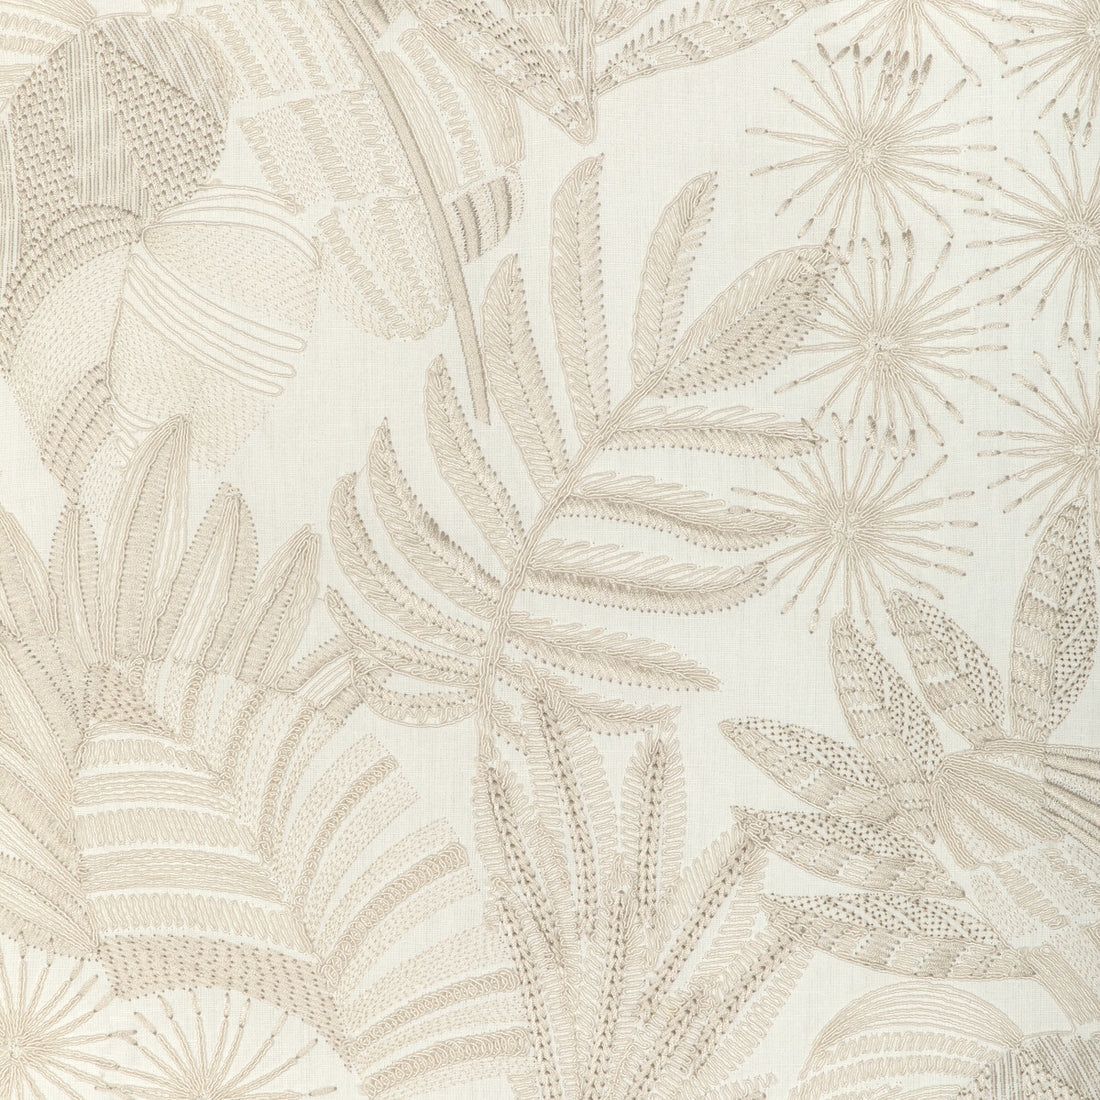 Marajo fabric in ivory color - pattern 37249.1.0 - by Kravet Couture in the Casa Botanica collection